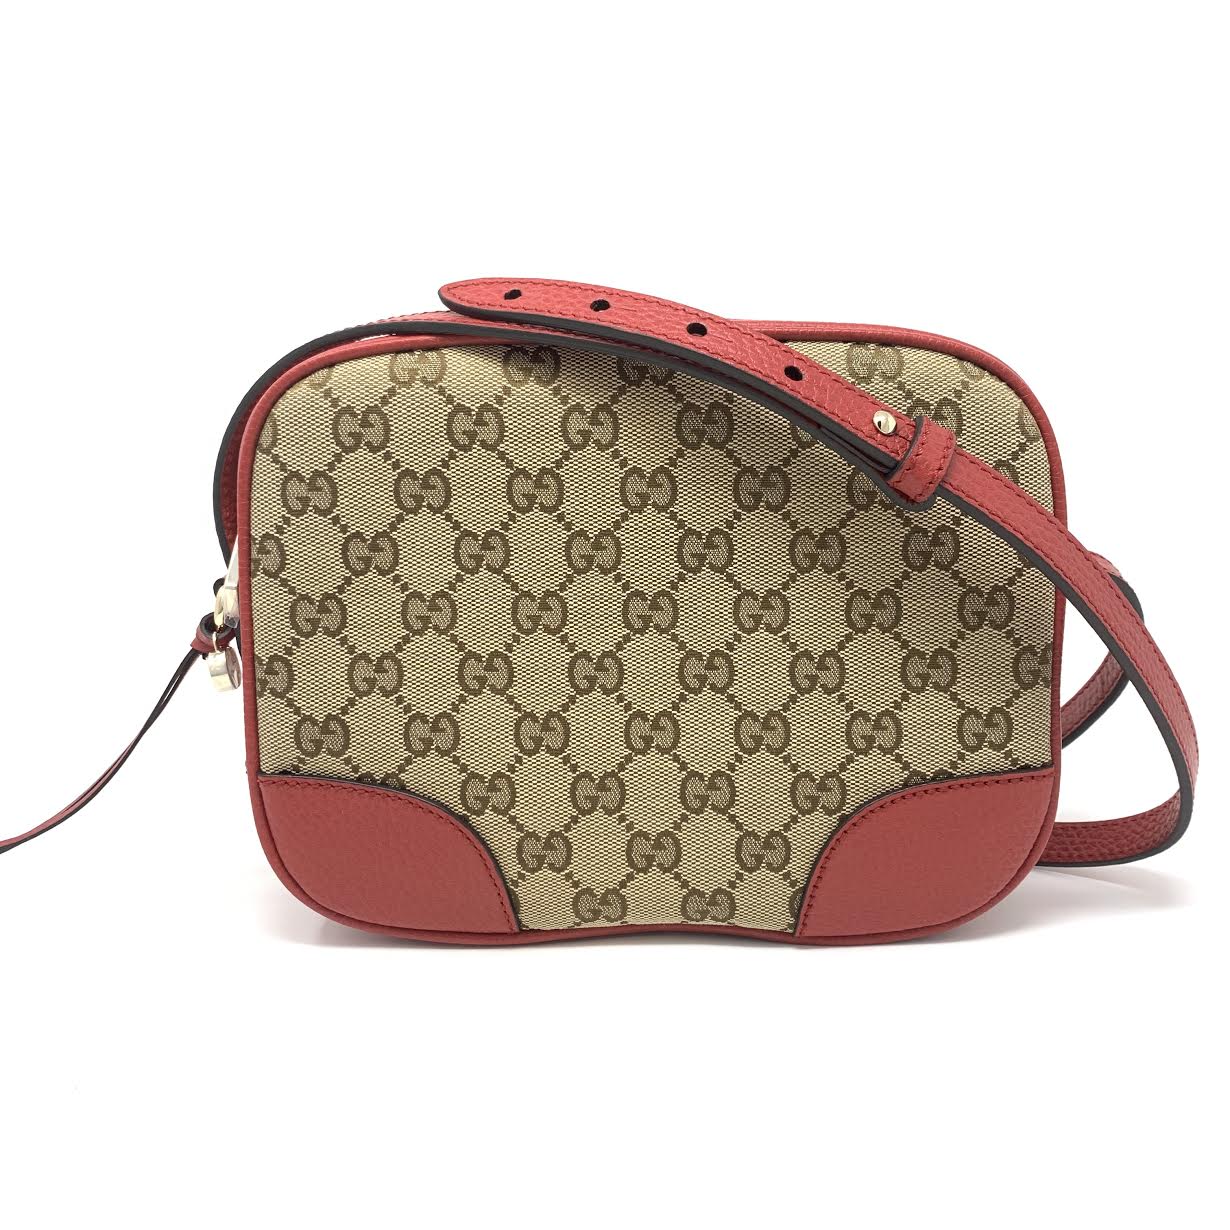 Gucci Bree Leather Beige/Red GG Canvas Cross Body Bag – Sunset